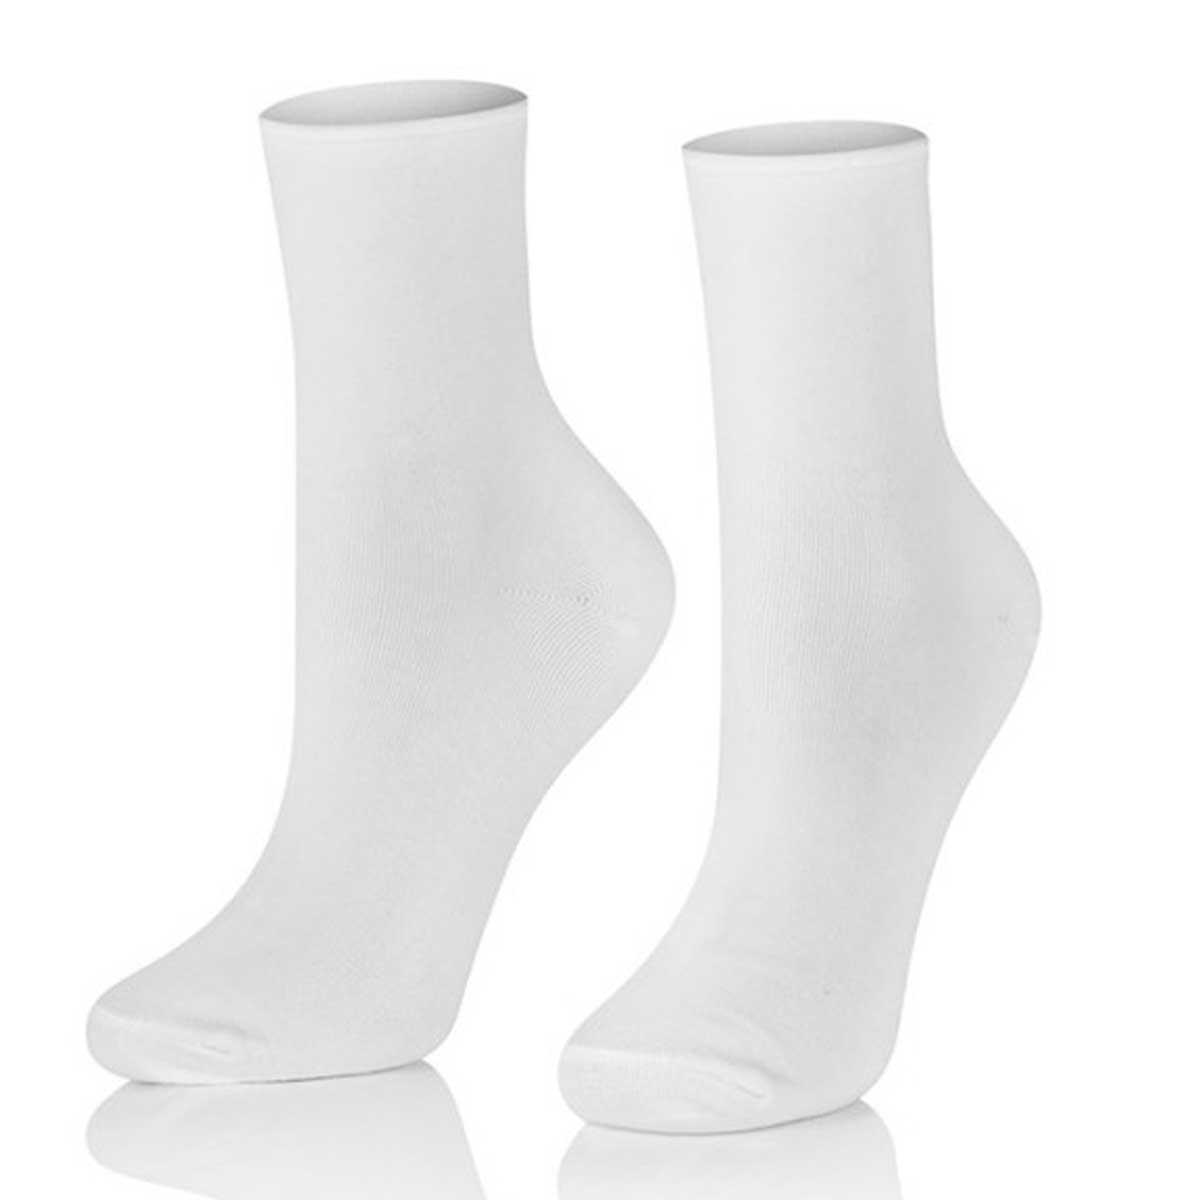 3-pack fine cotton socks with rolled edges • socks that do not tighten